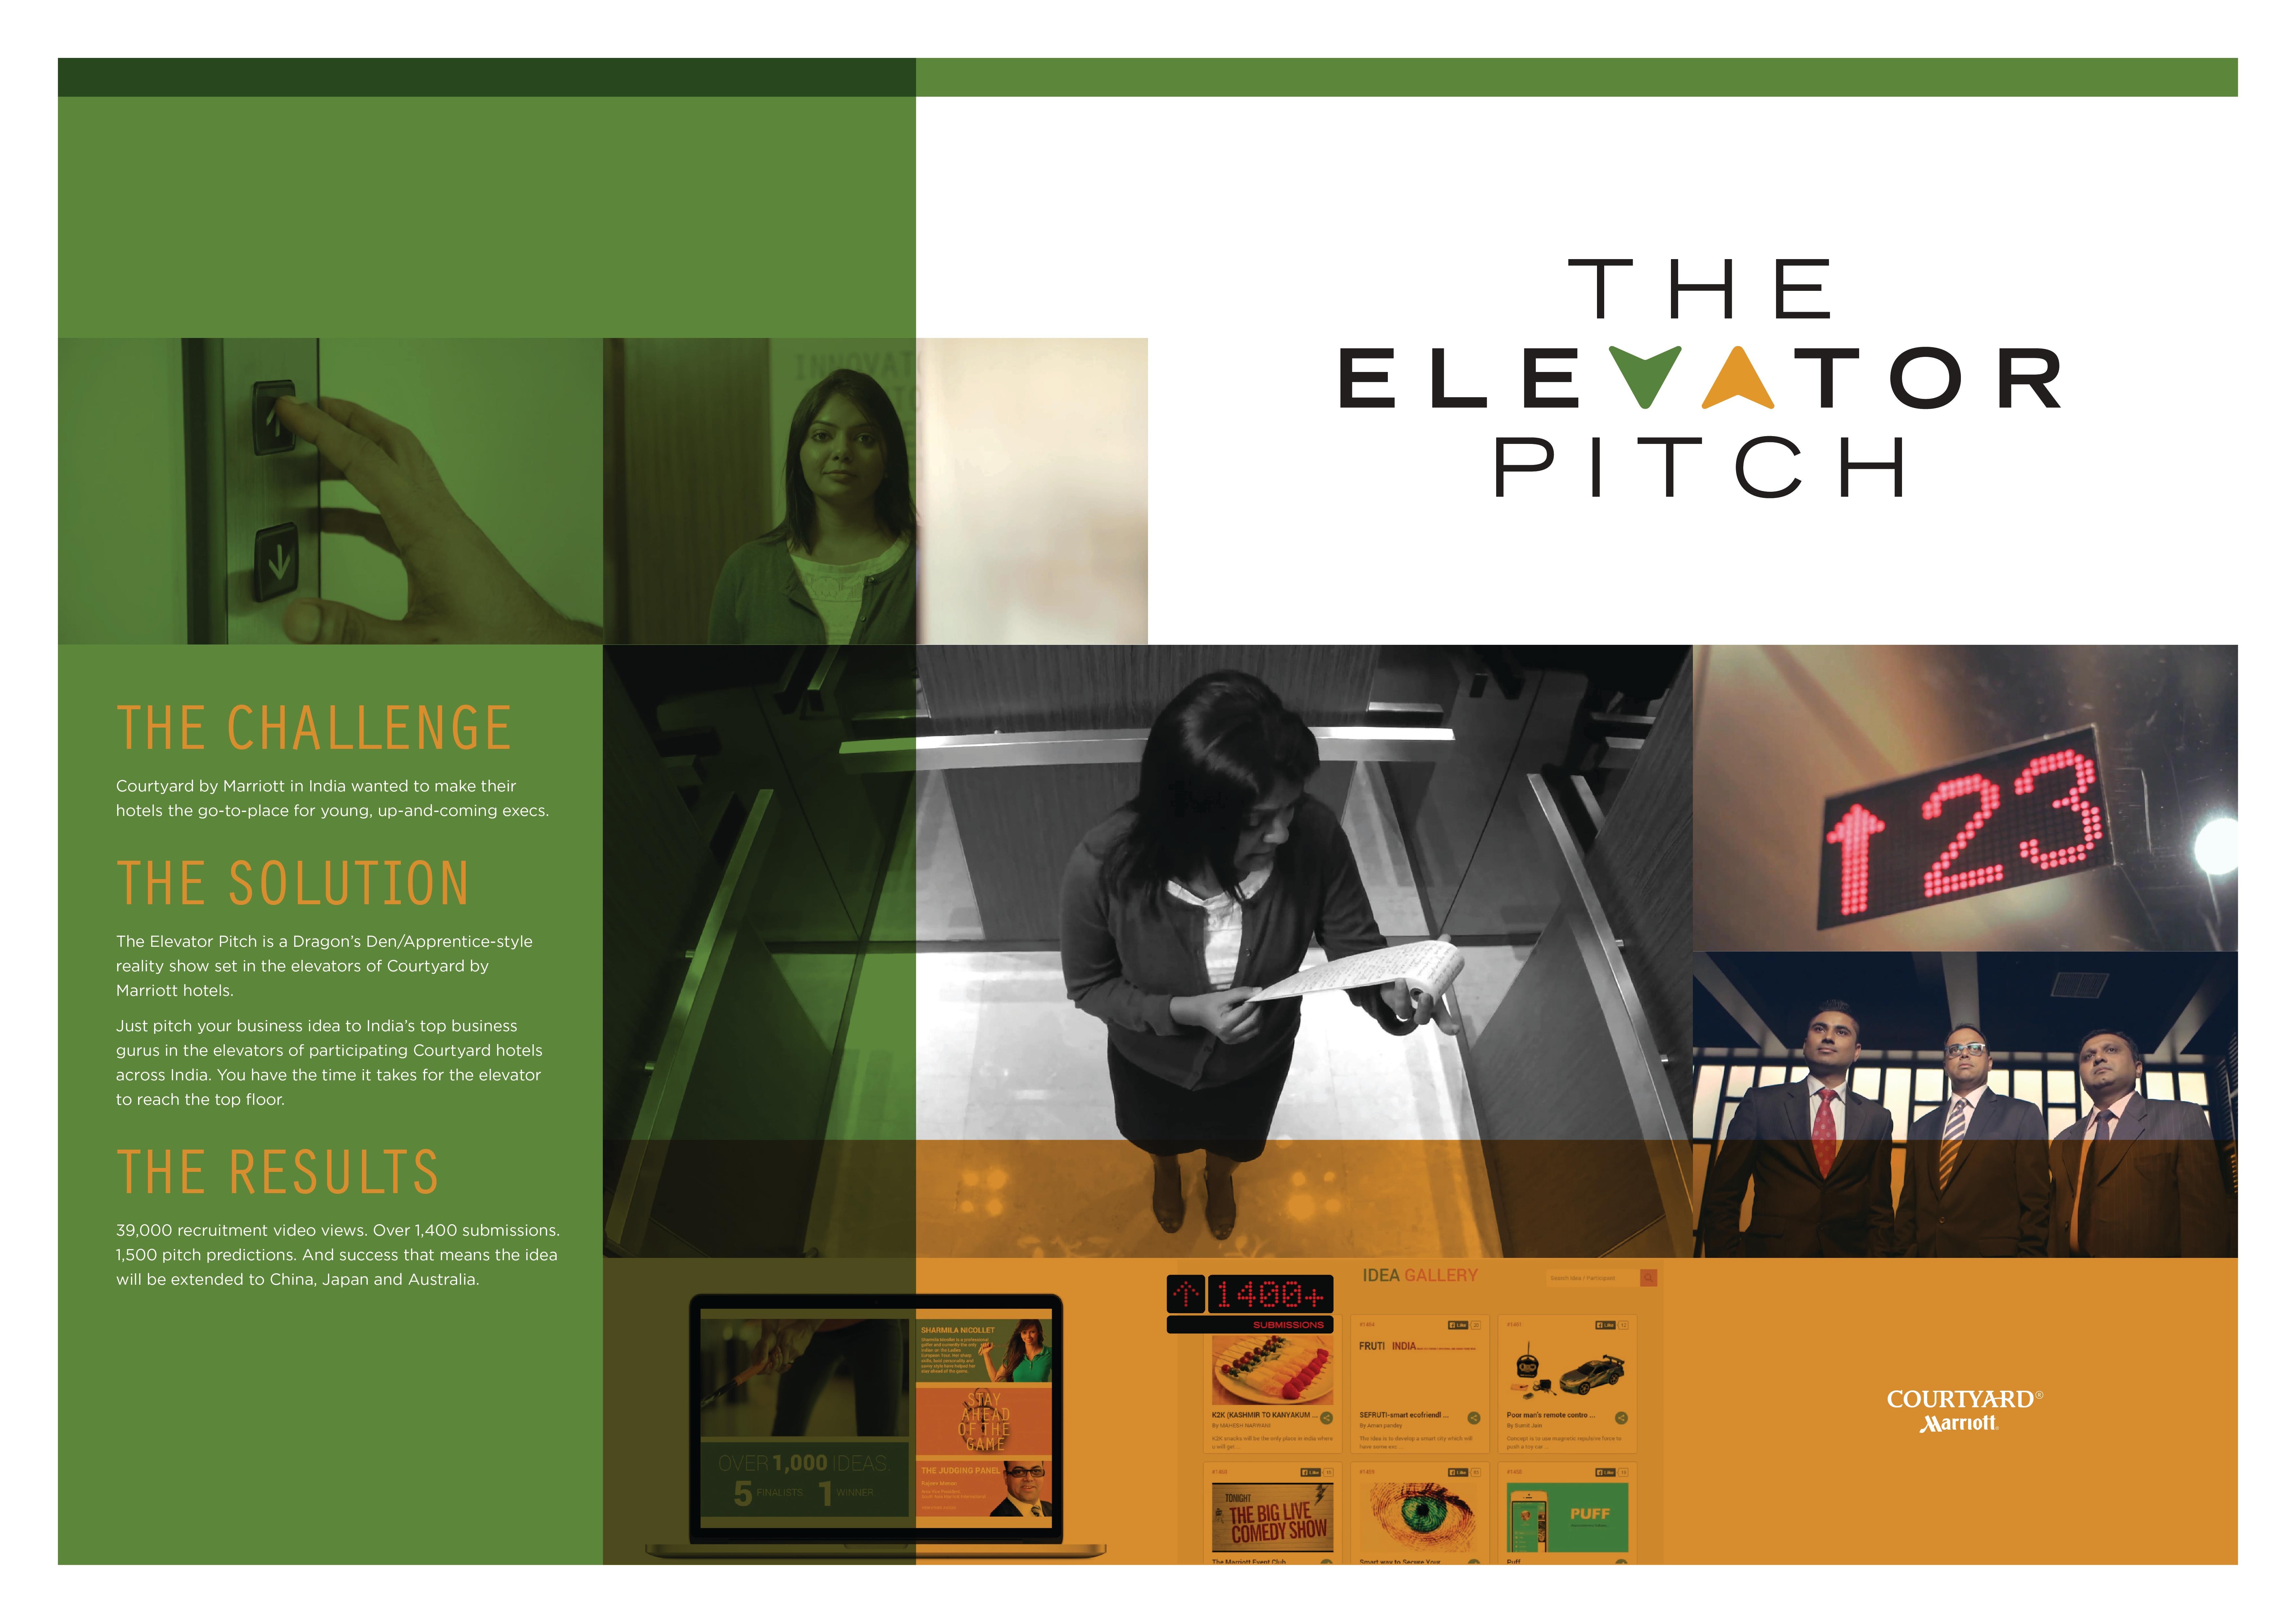 THE ELEVATOR PITCH